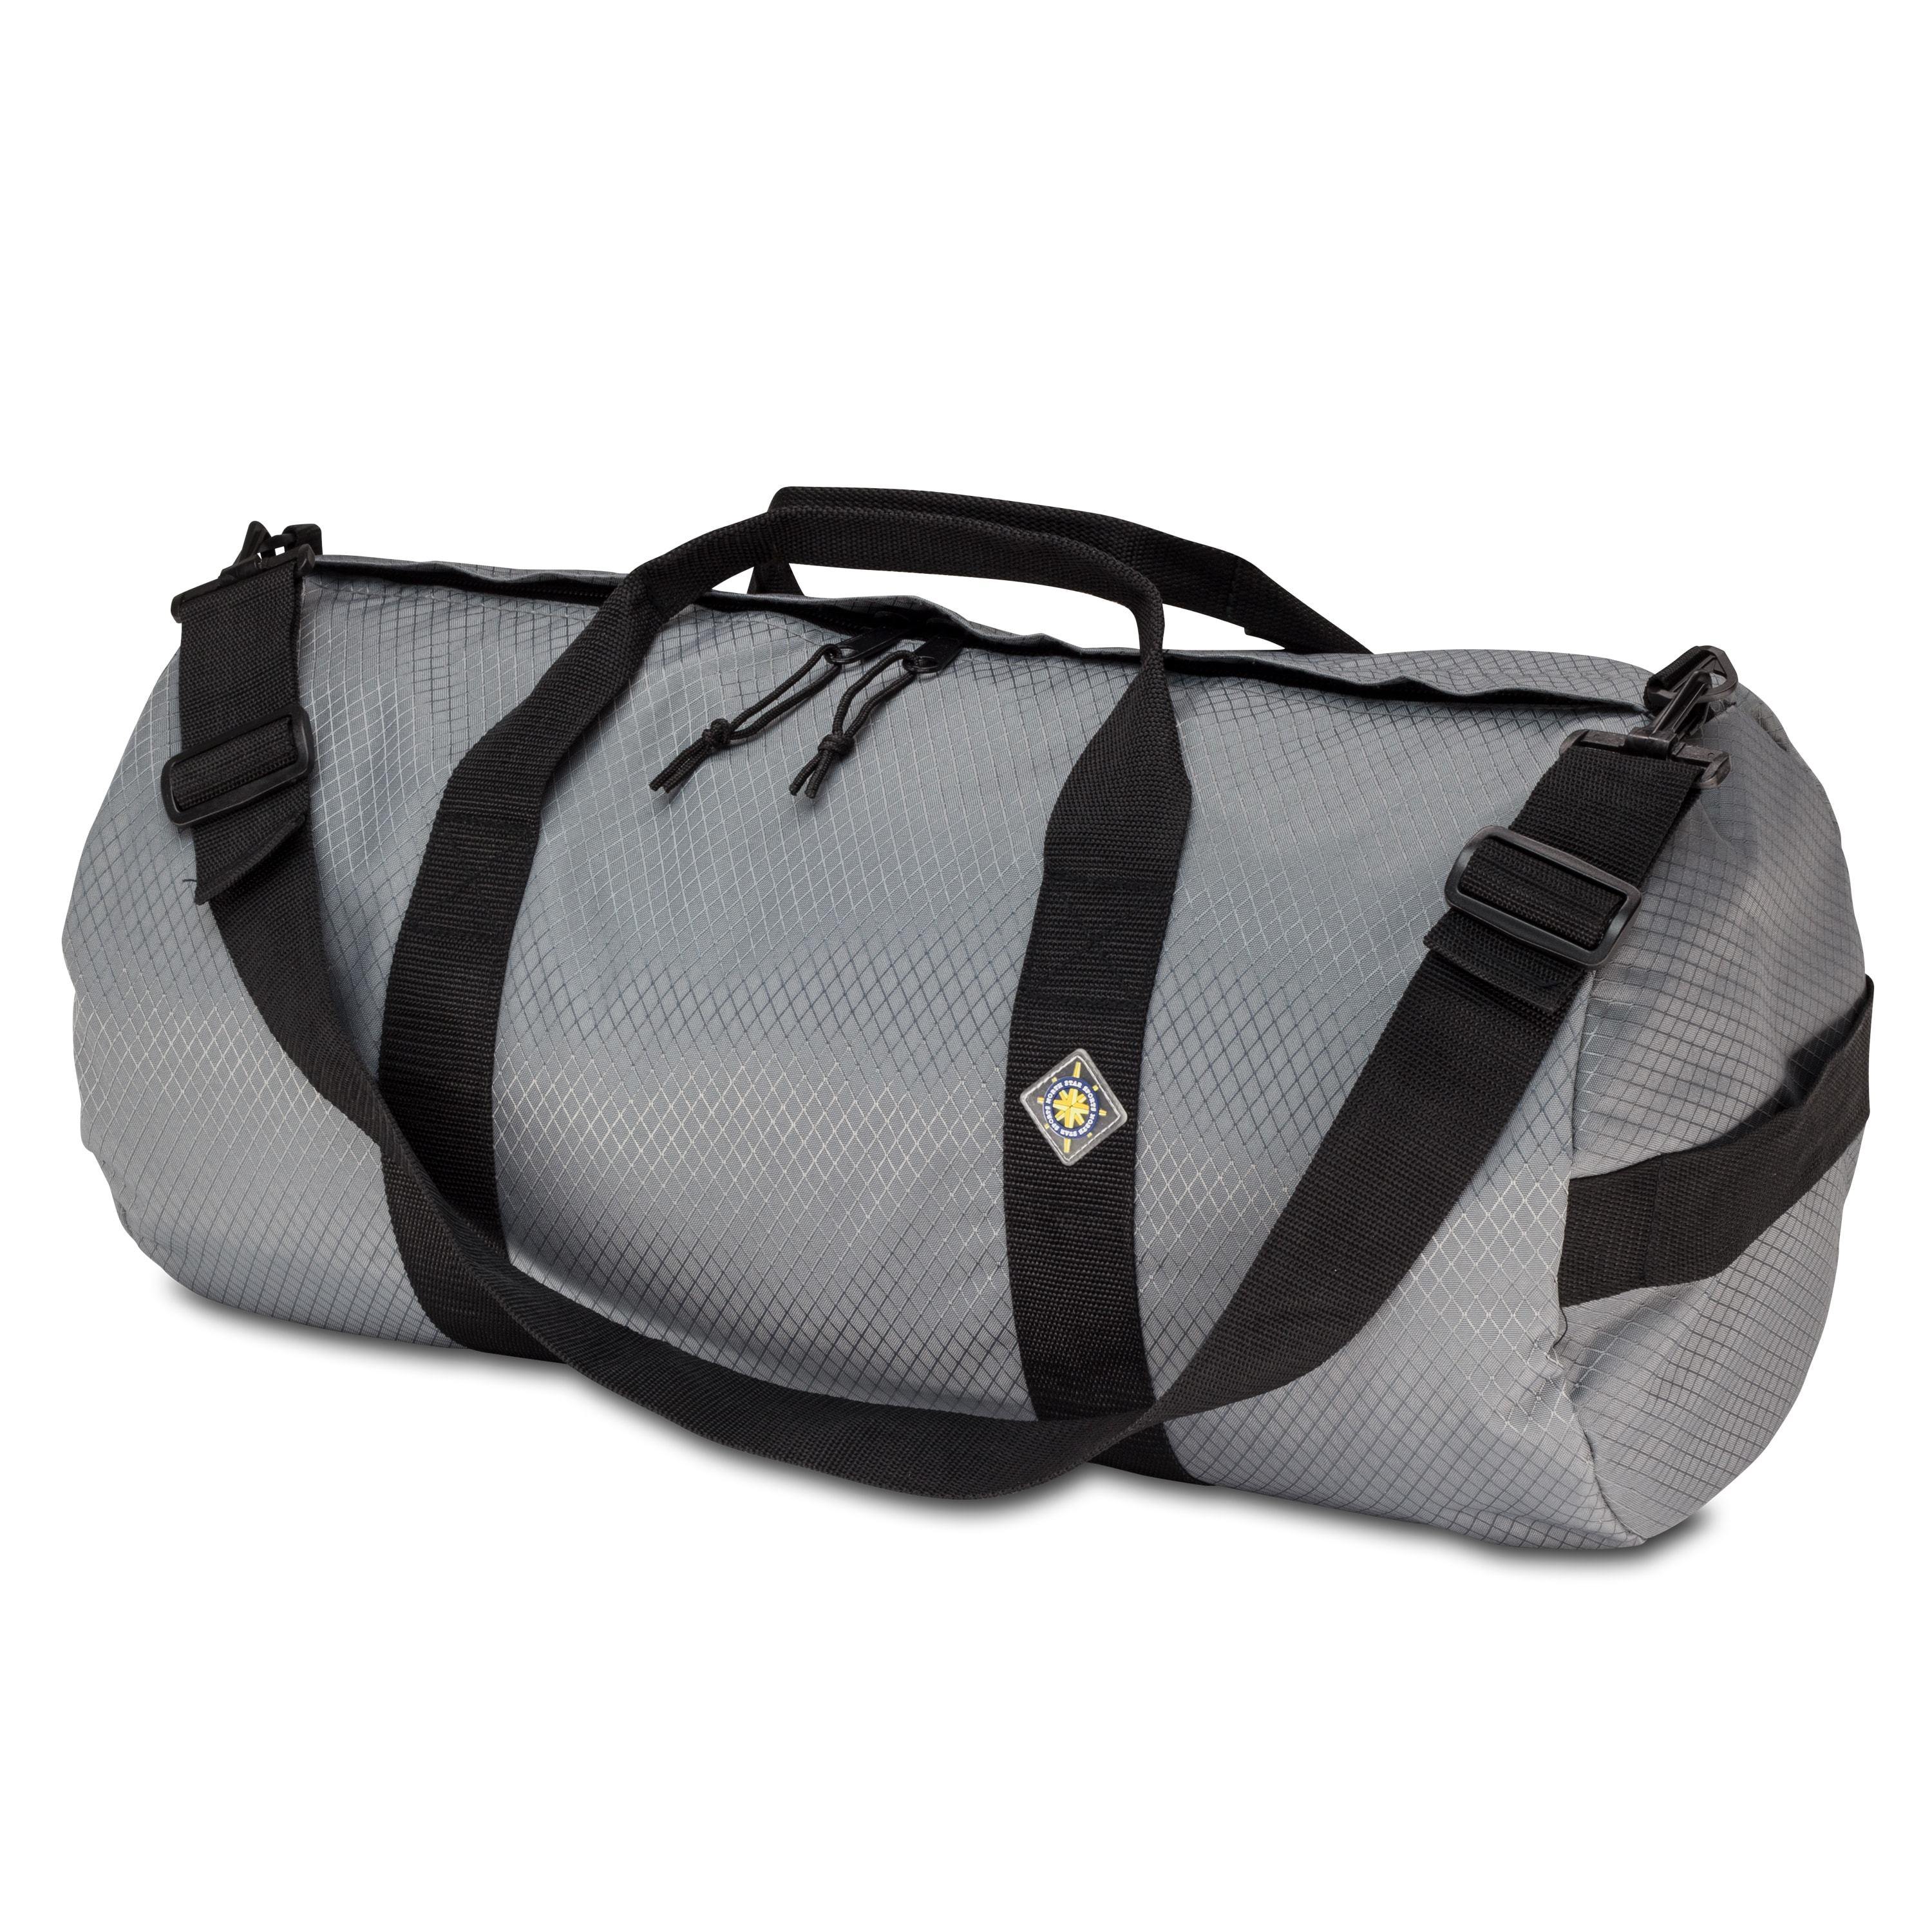 Studio photo the Steel Grey SD1224DLX Standard Duffle by Northstar Bags. 44 liter duffel with diamond ripstop fabric, thick webbing straps, and a large format metal zipper. Guaranteed for life.